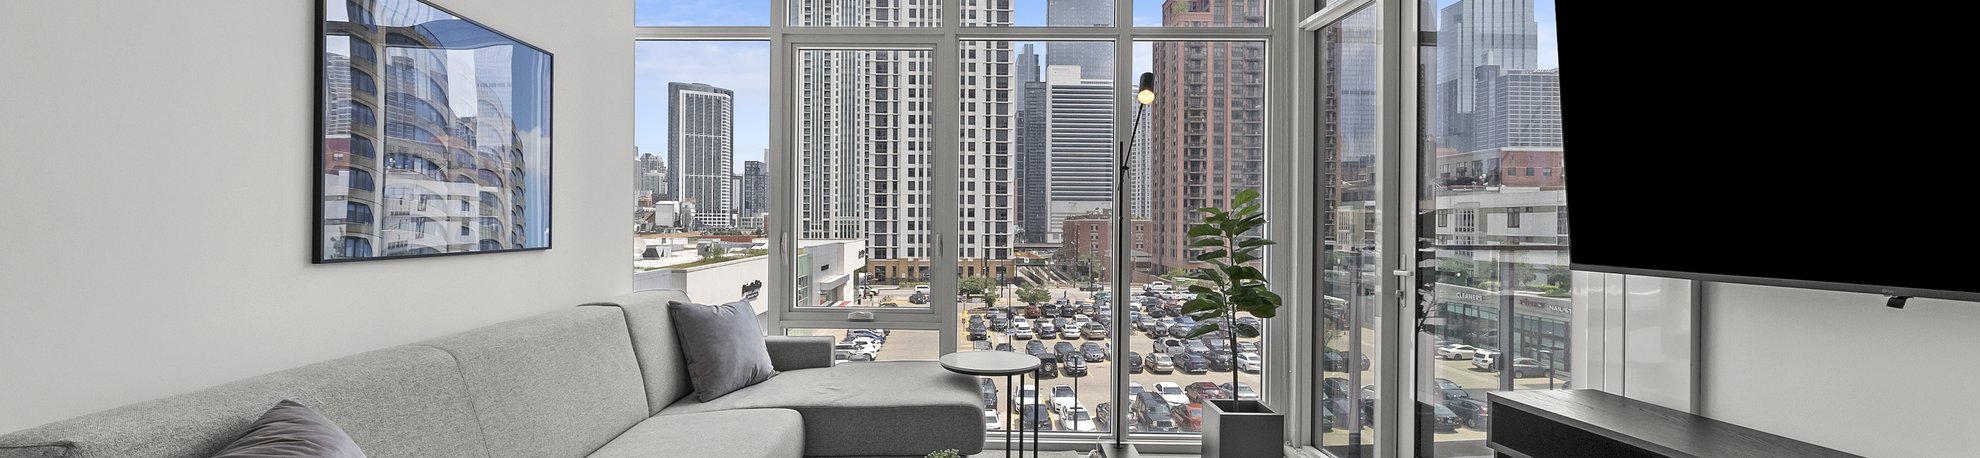 junior two bedroom suite features living area with tv mounted on the wall with beautiful chicago city view at level chicago fulton market